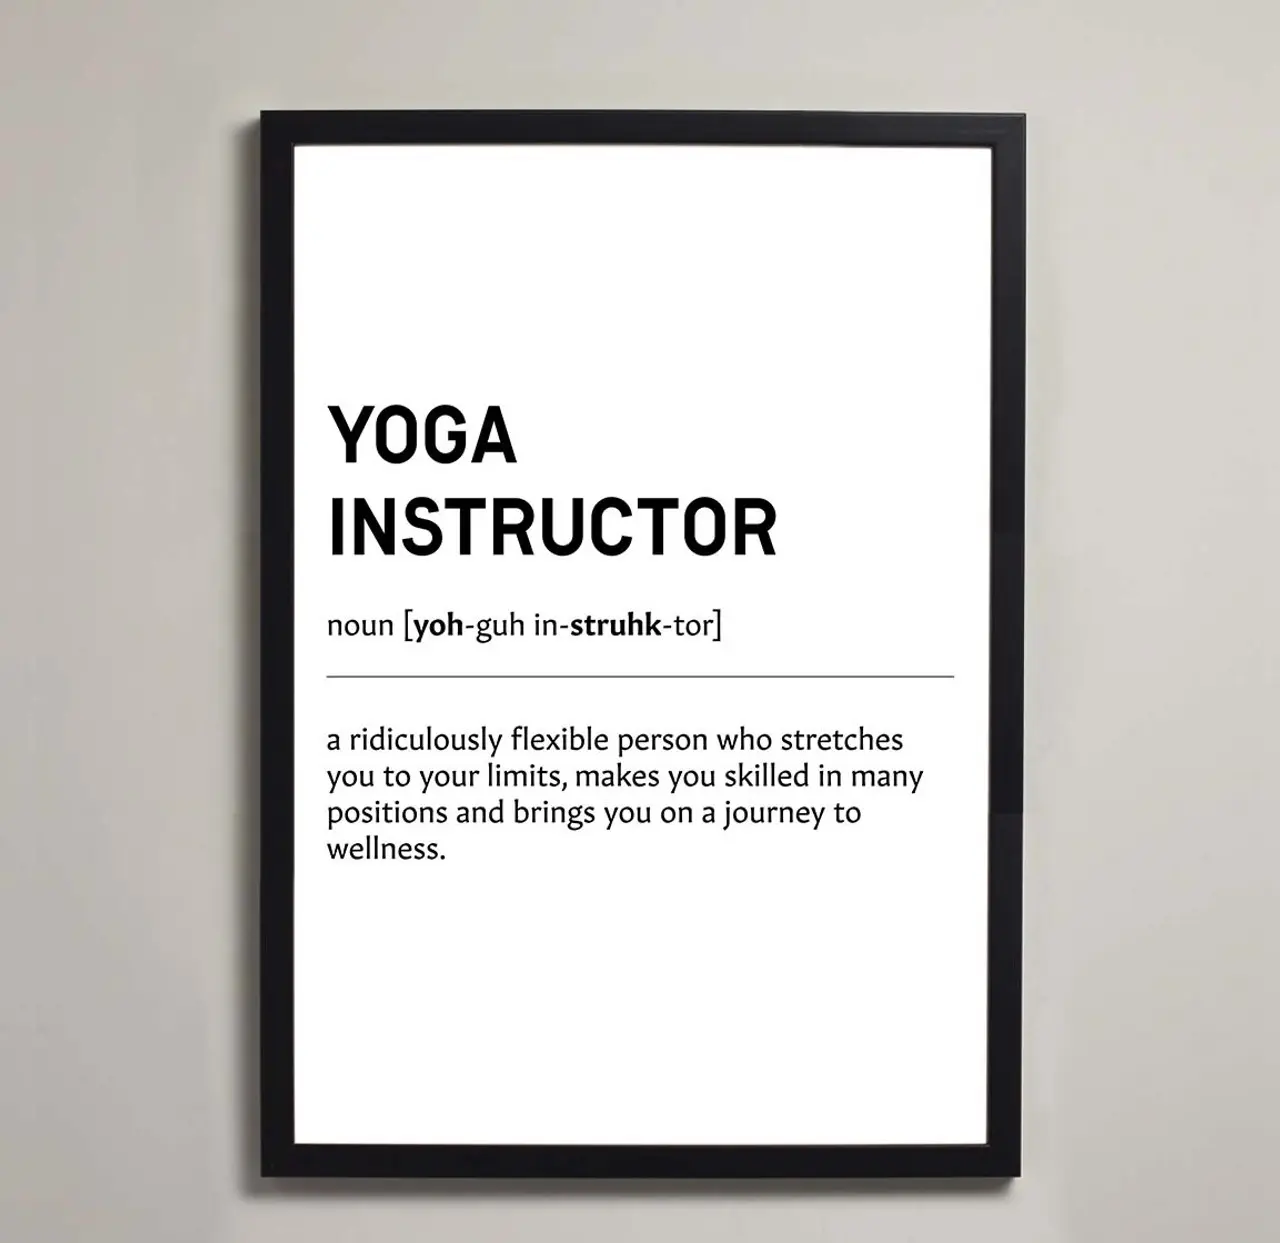 yoga instructor definition - What are the terms for yoga teacher